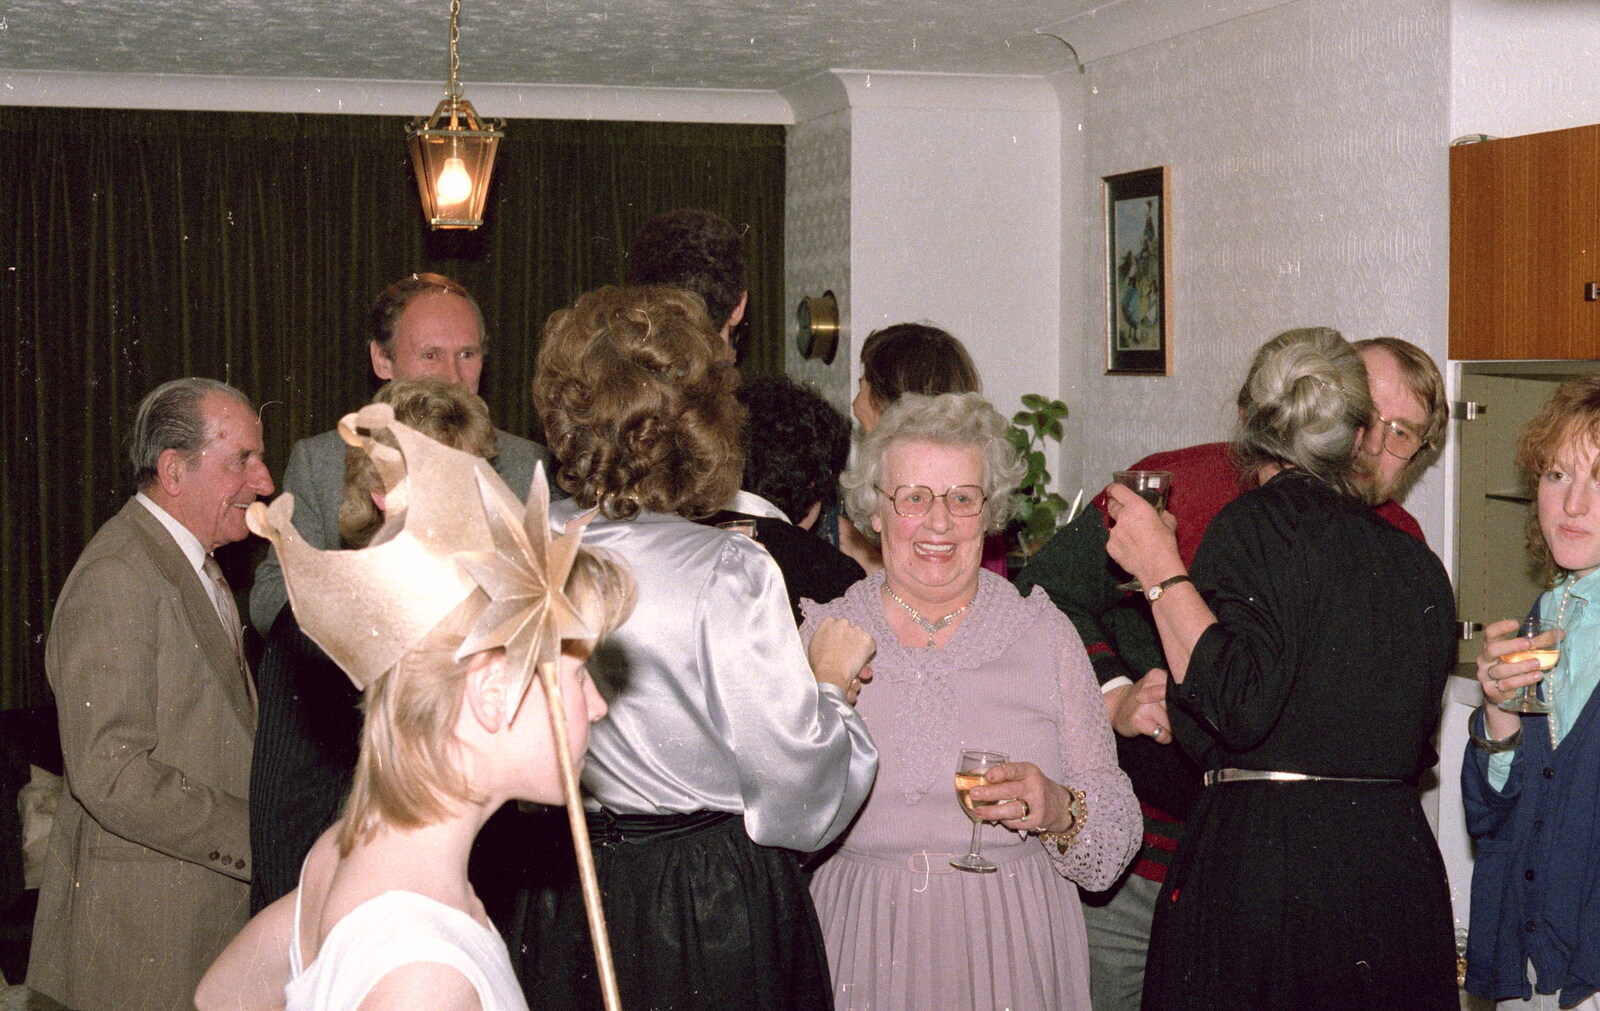 Alice roams around with a star from New Year's Eve at Anna's, Walkford, Dorset - 31st December 1985